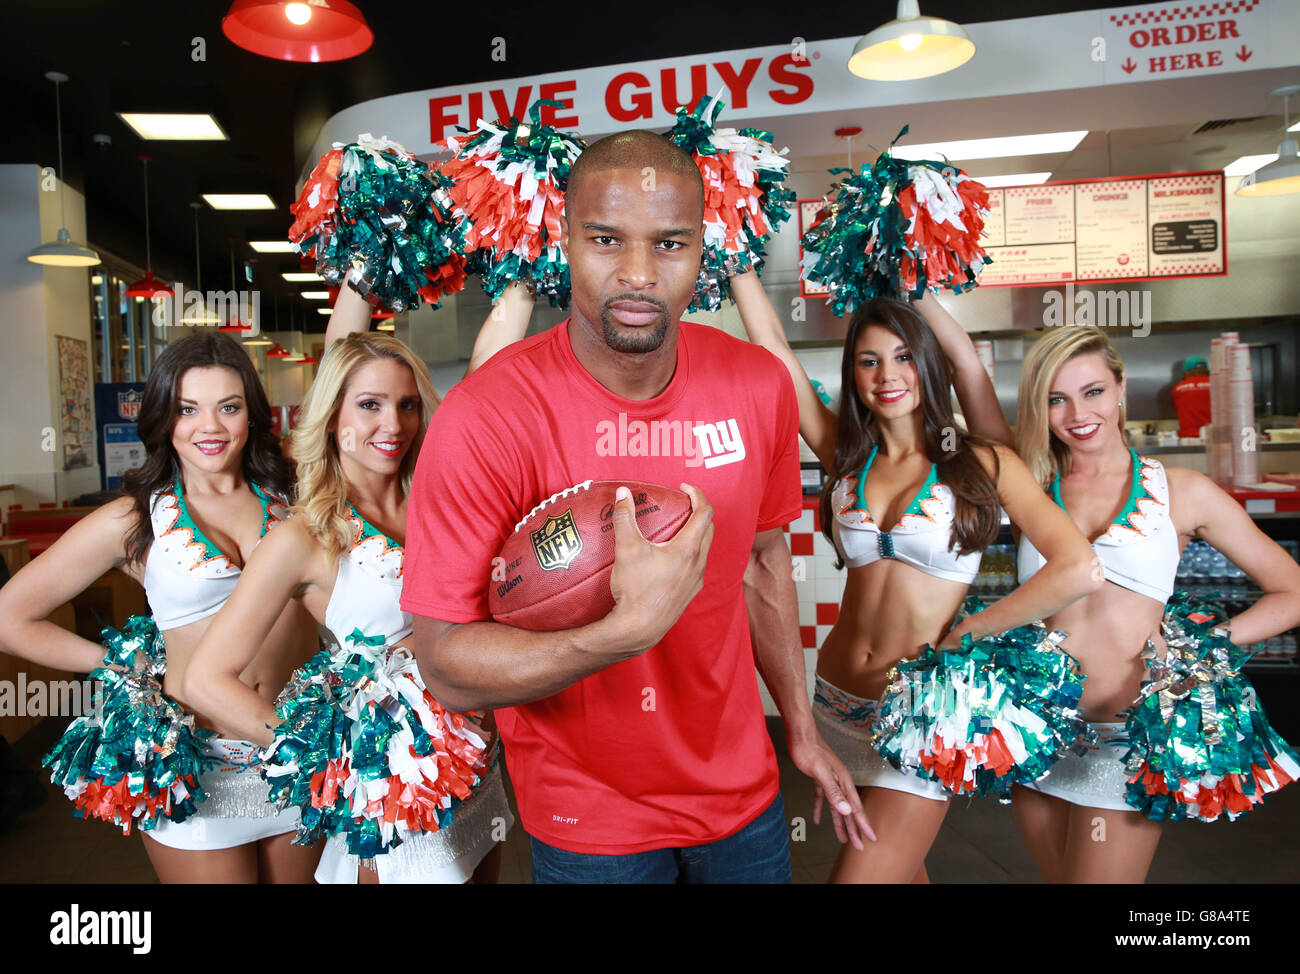 EDITORIAL USE ONLY The Miami Dolphin Cheerleaders Etta, Dancia, Britt and Paige and UK NFL Ambassador Osi Umenyiora, dual Super Bowl winner who recently retired from the game, celebrate the launch of the NFL and Five Guys partnership at the burger restaurant in Covent Garden, London. Stock Photo